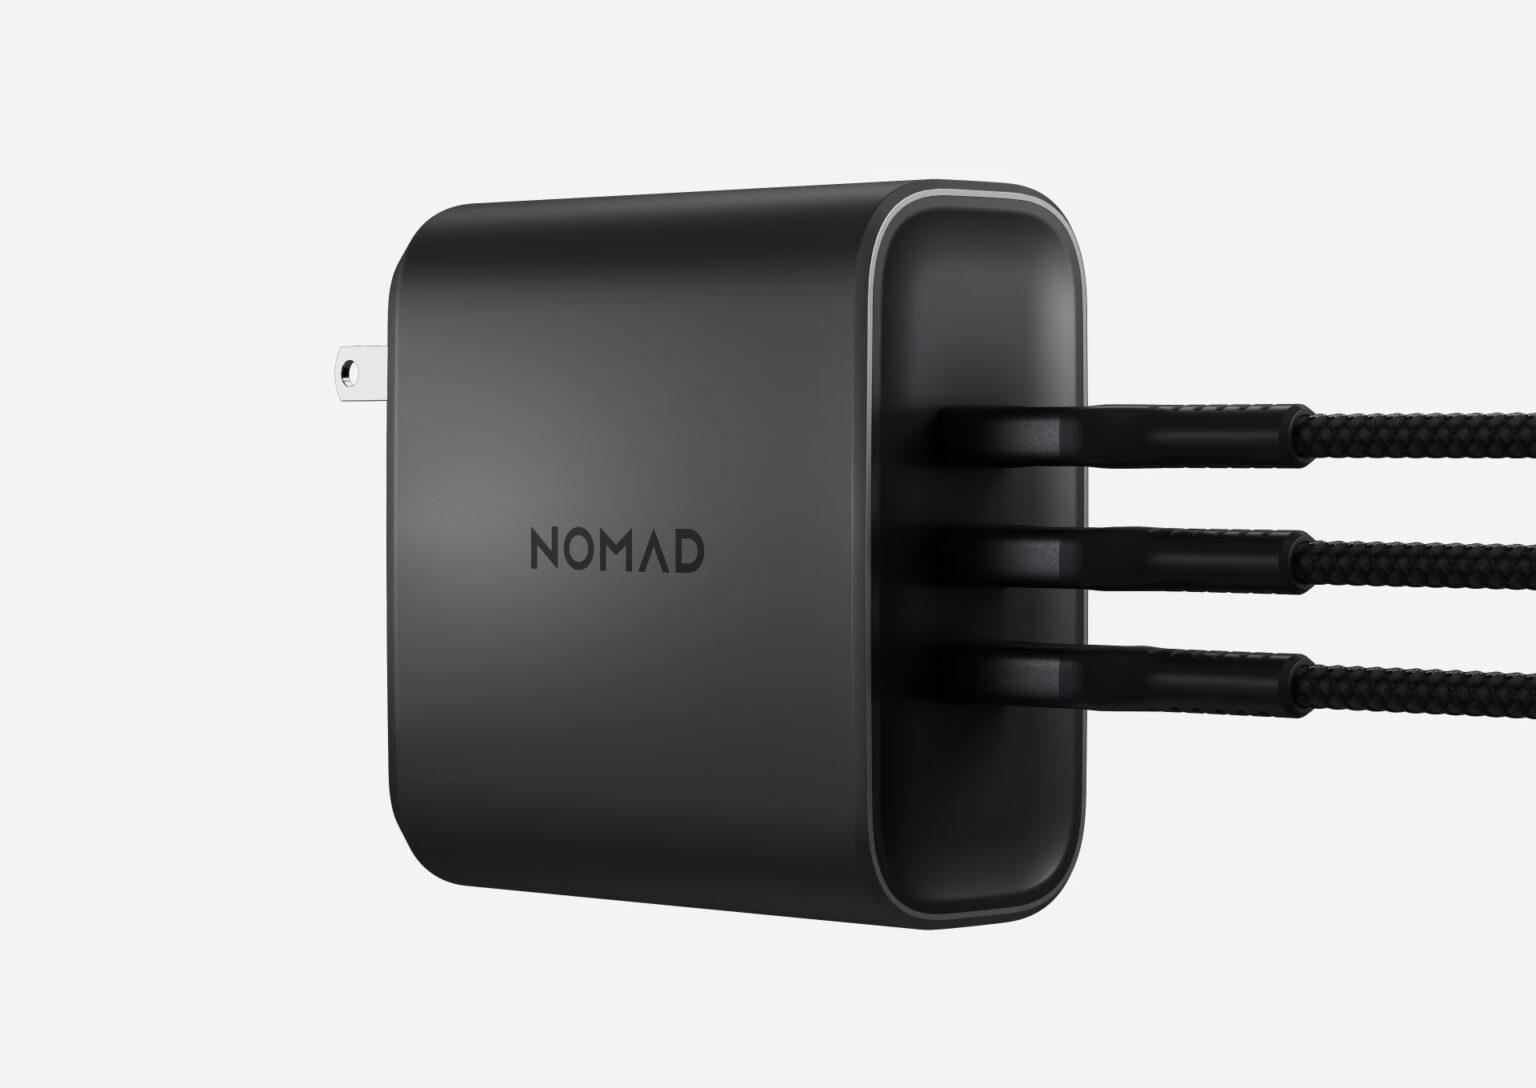 Charge three devices at once via USB-C with Nomad's new GaN charger.